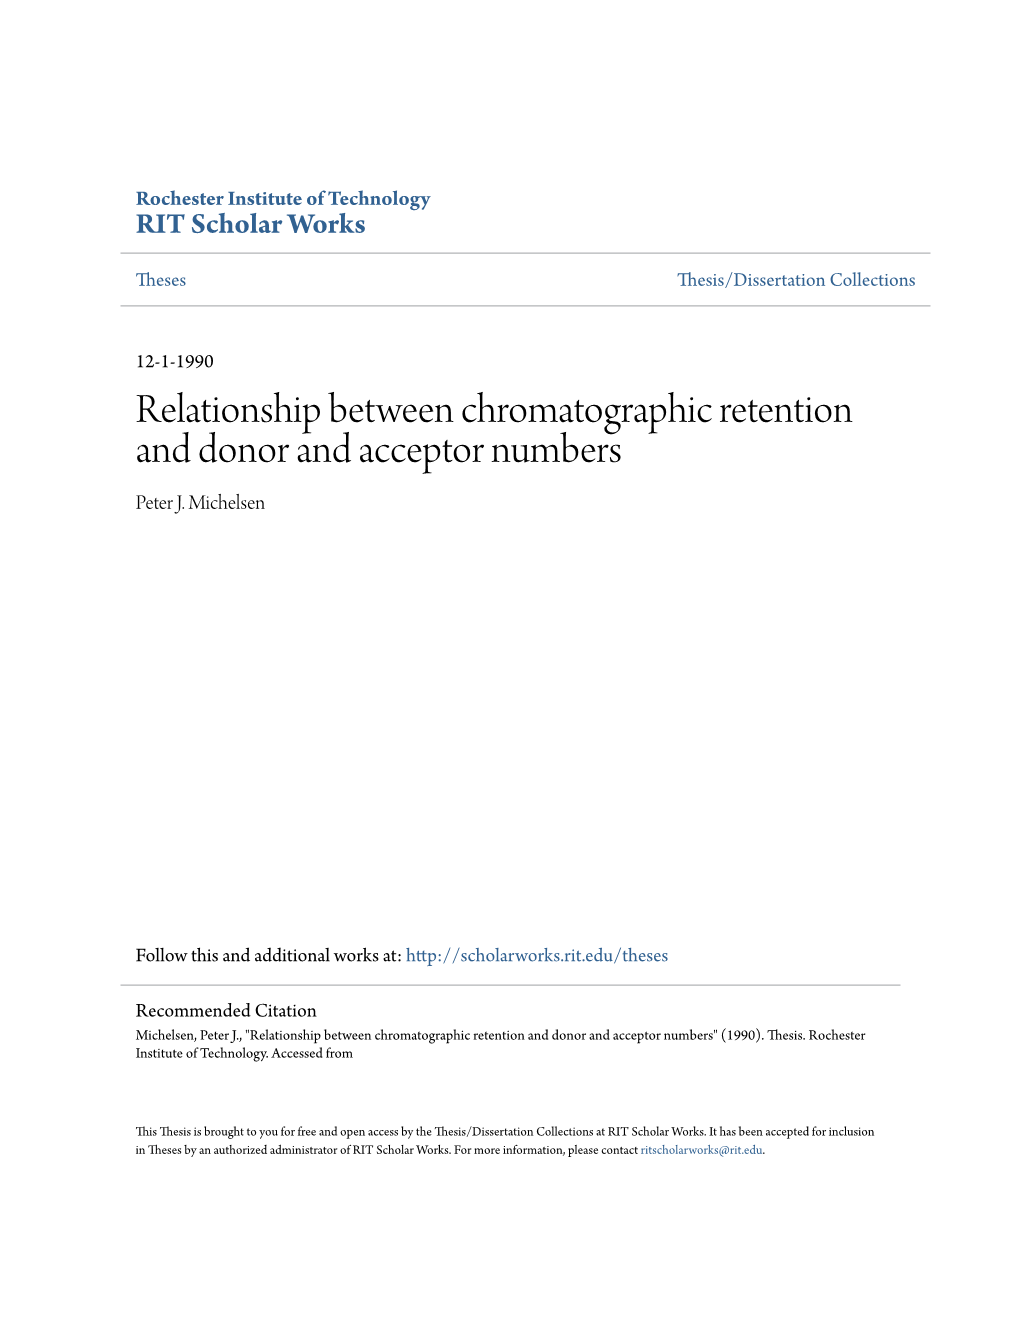 Relationship Between Chromatographic Retention and Donor and Acceptor Numbers Peter J